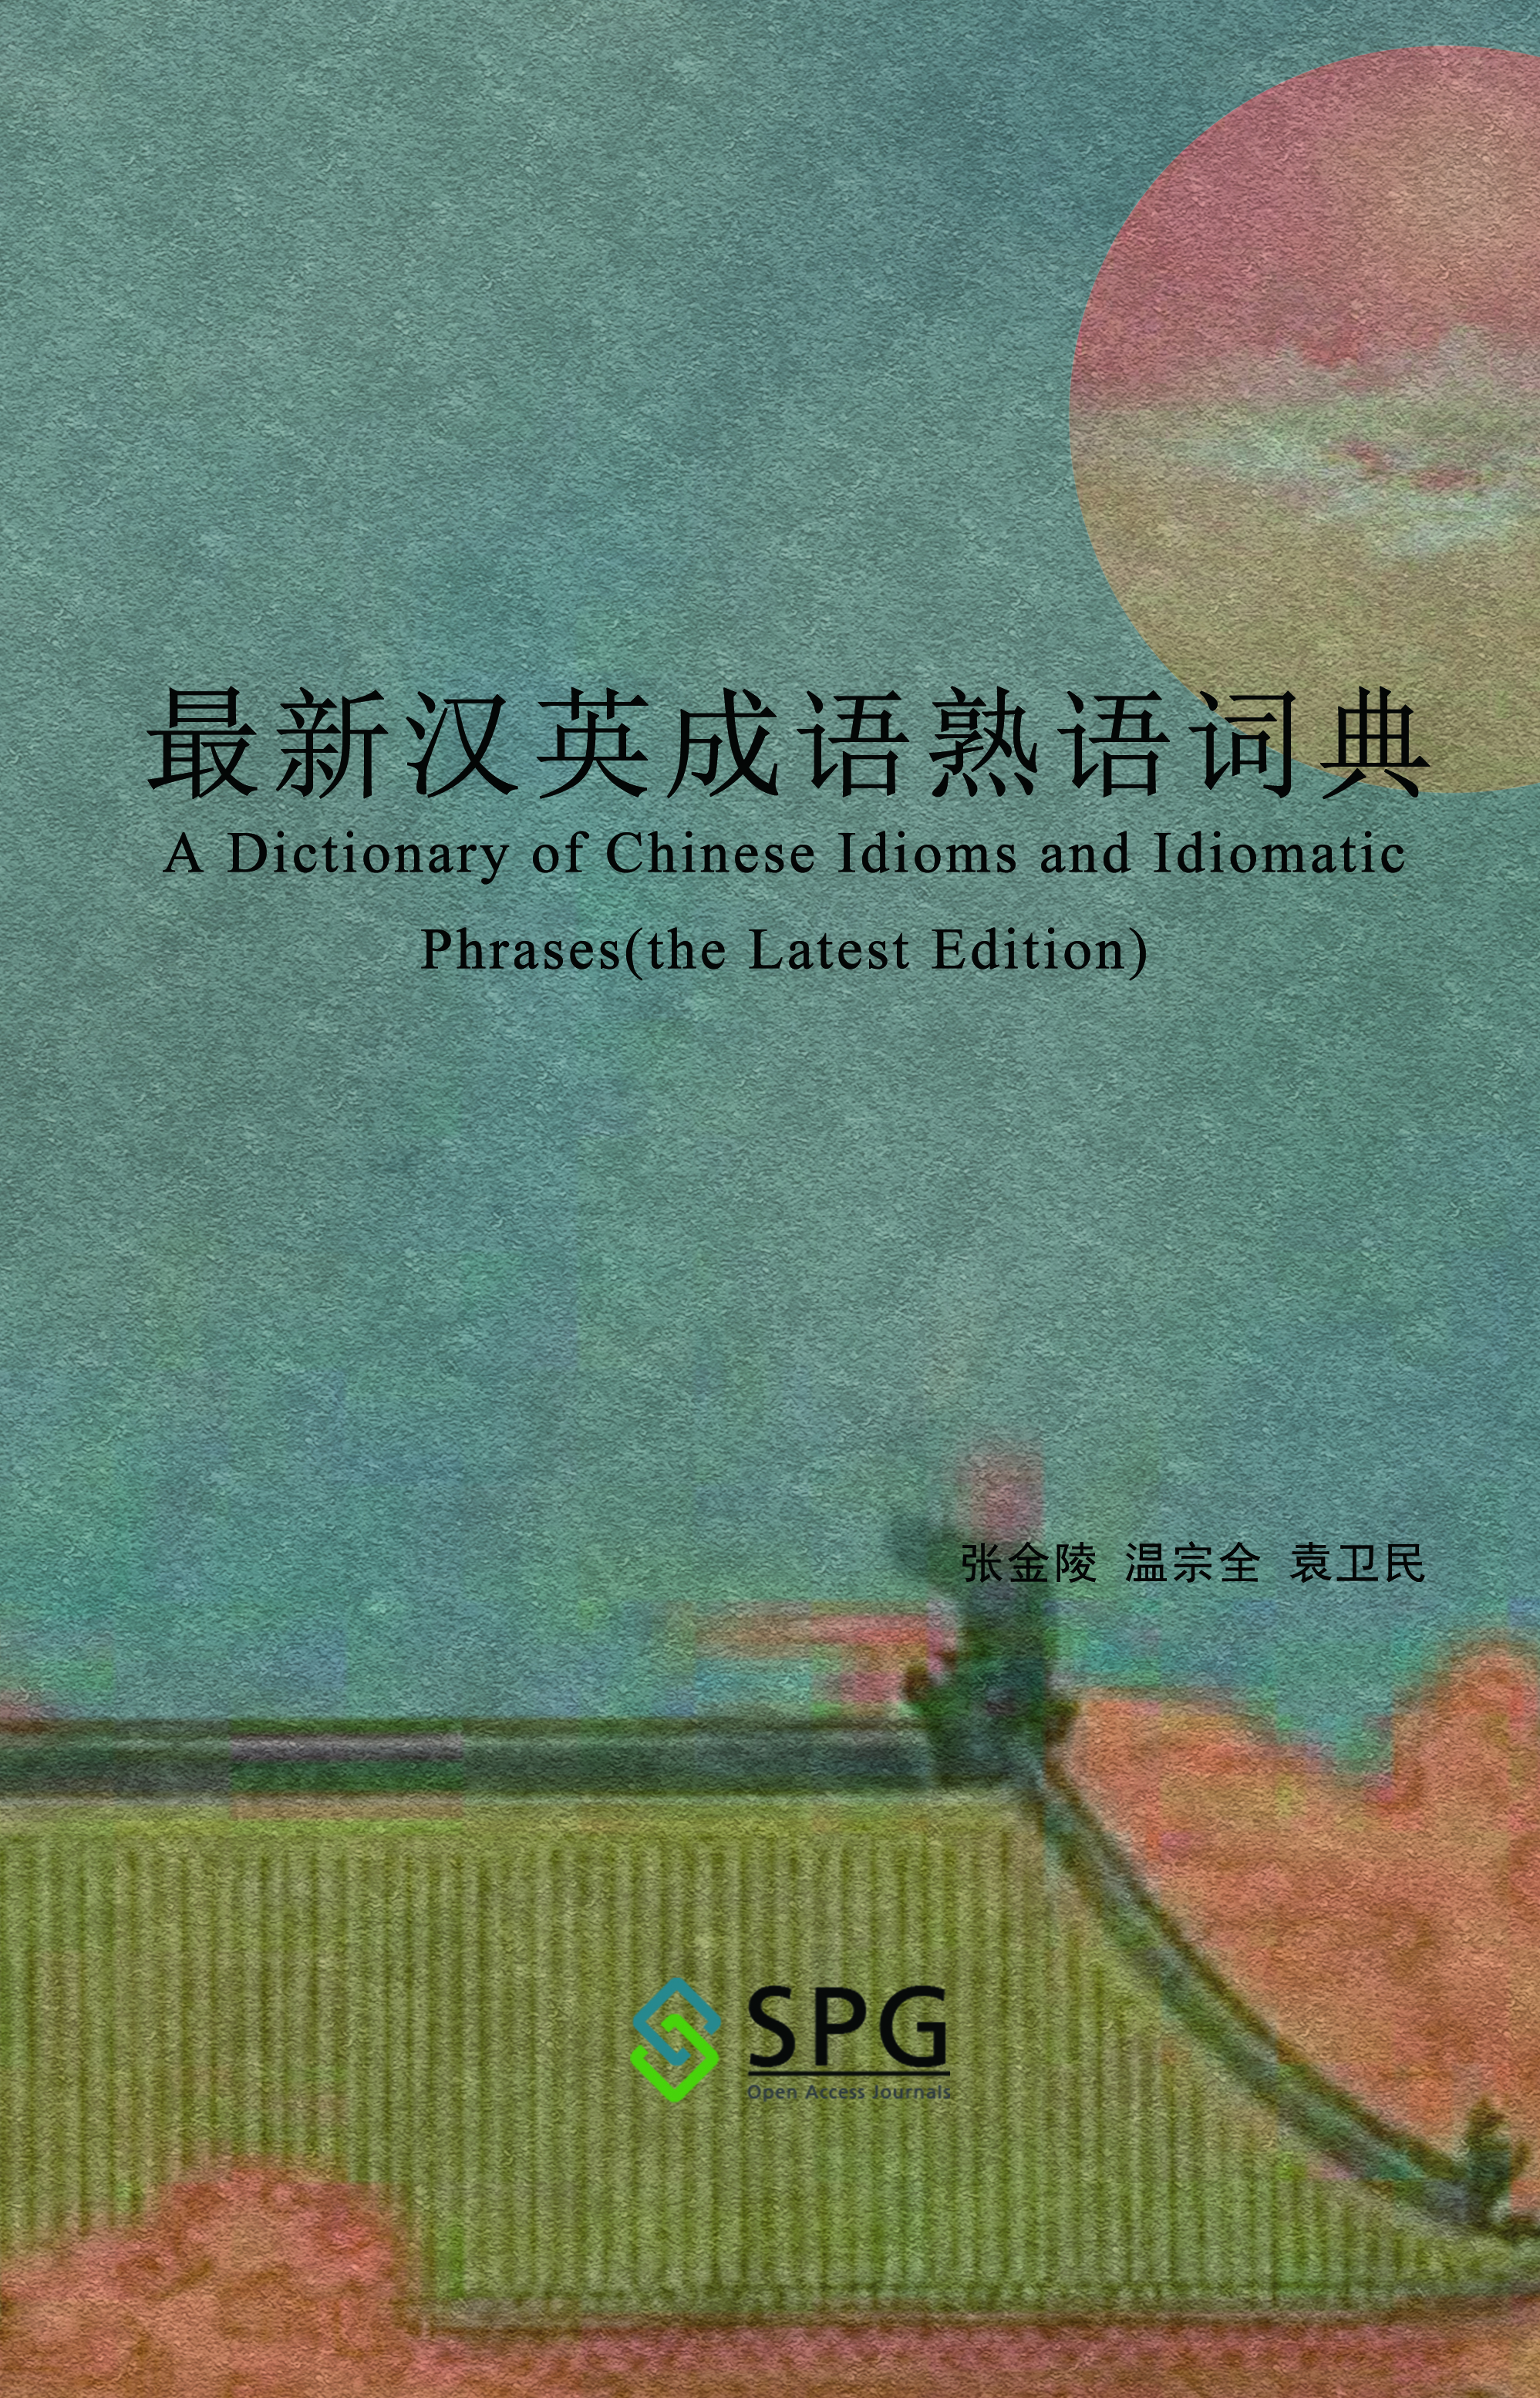 A Dictionary of Chinese Idioms and Idiomatic Phrases (the Latest Edition) | Scholar Publishing Group